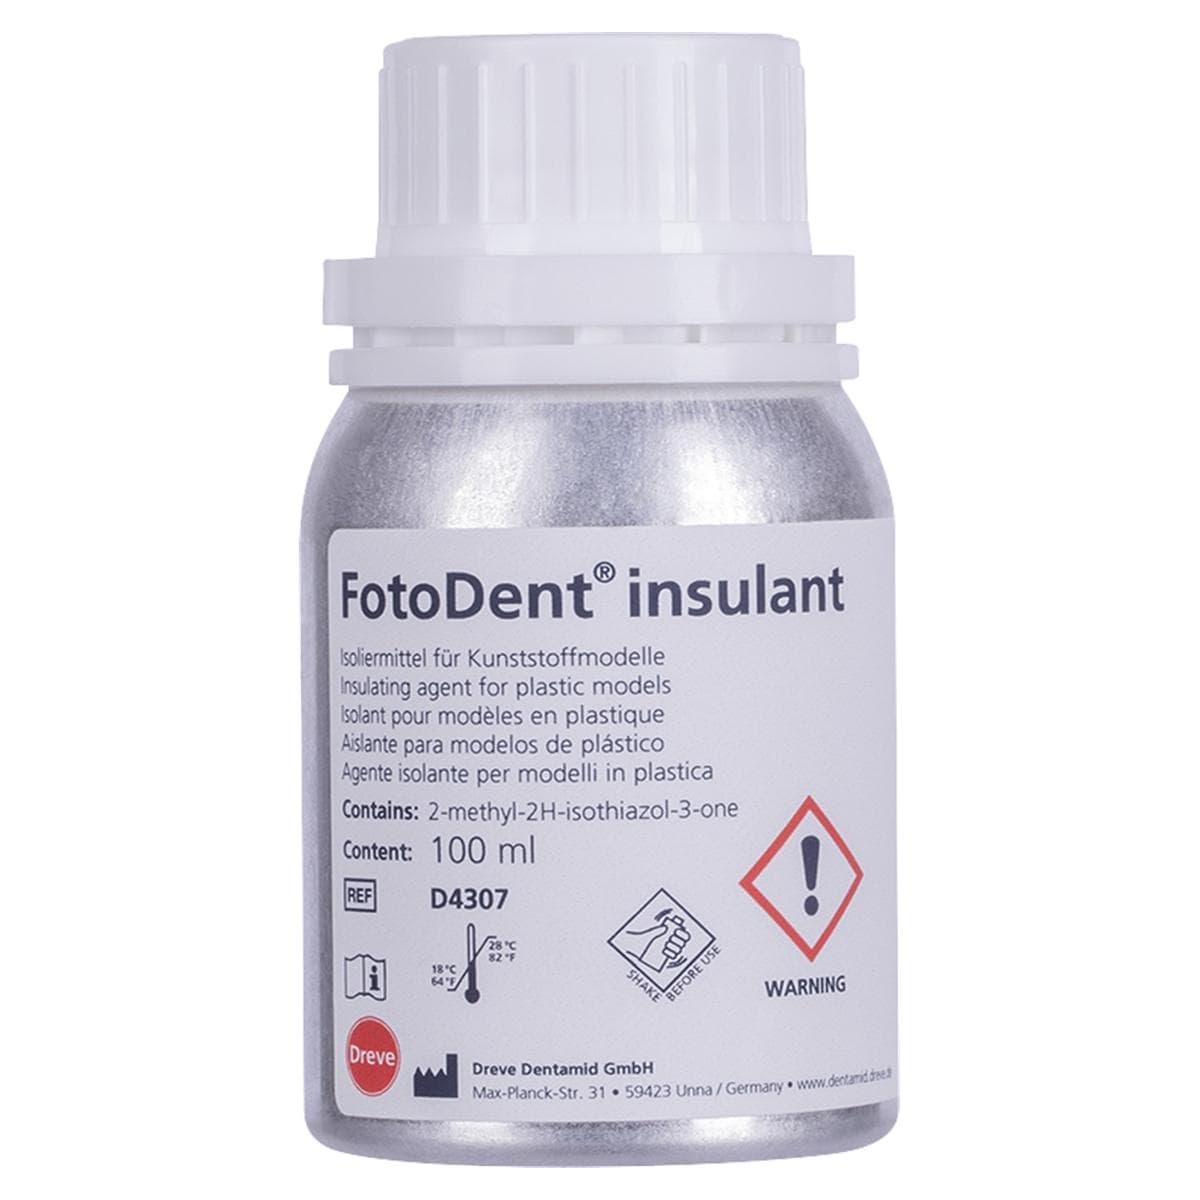 FotoDent® insulant - Flasche 100 ml